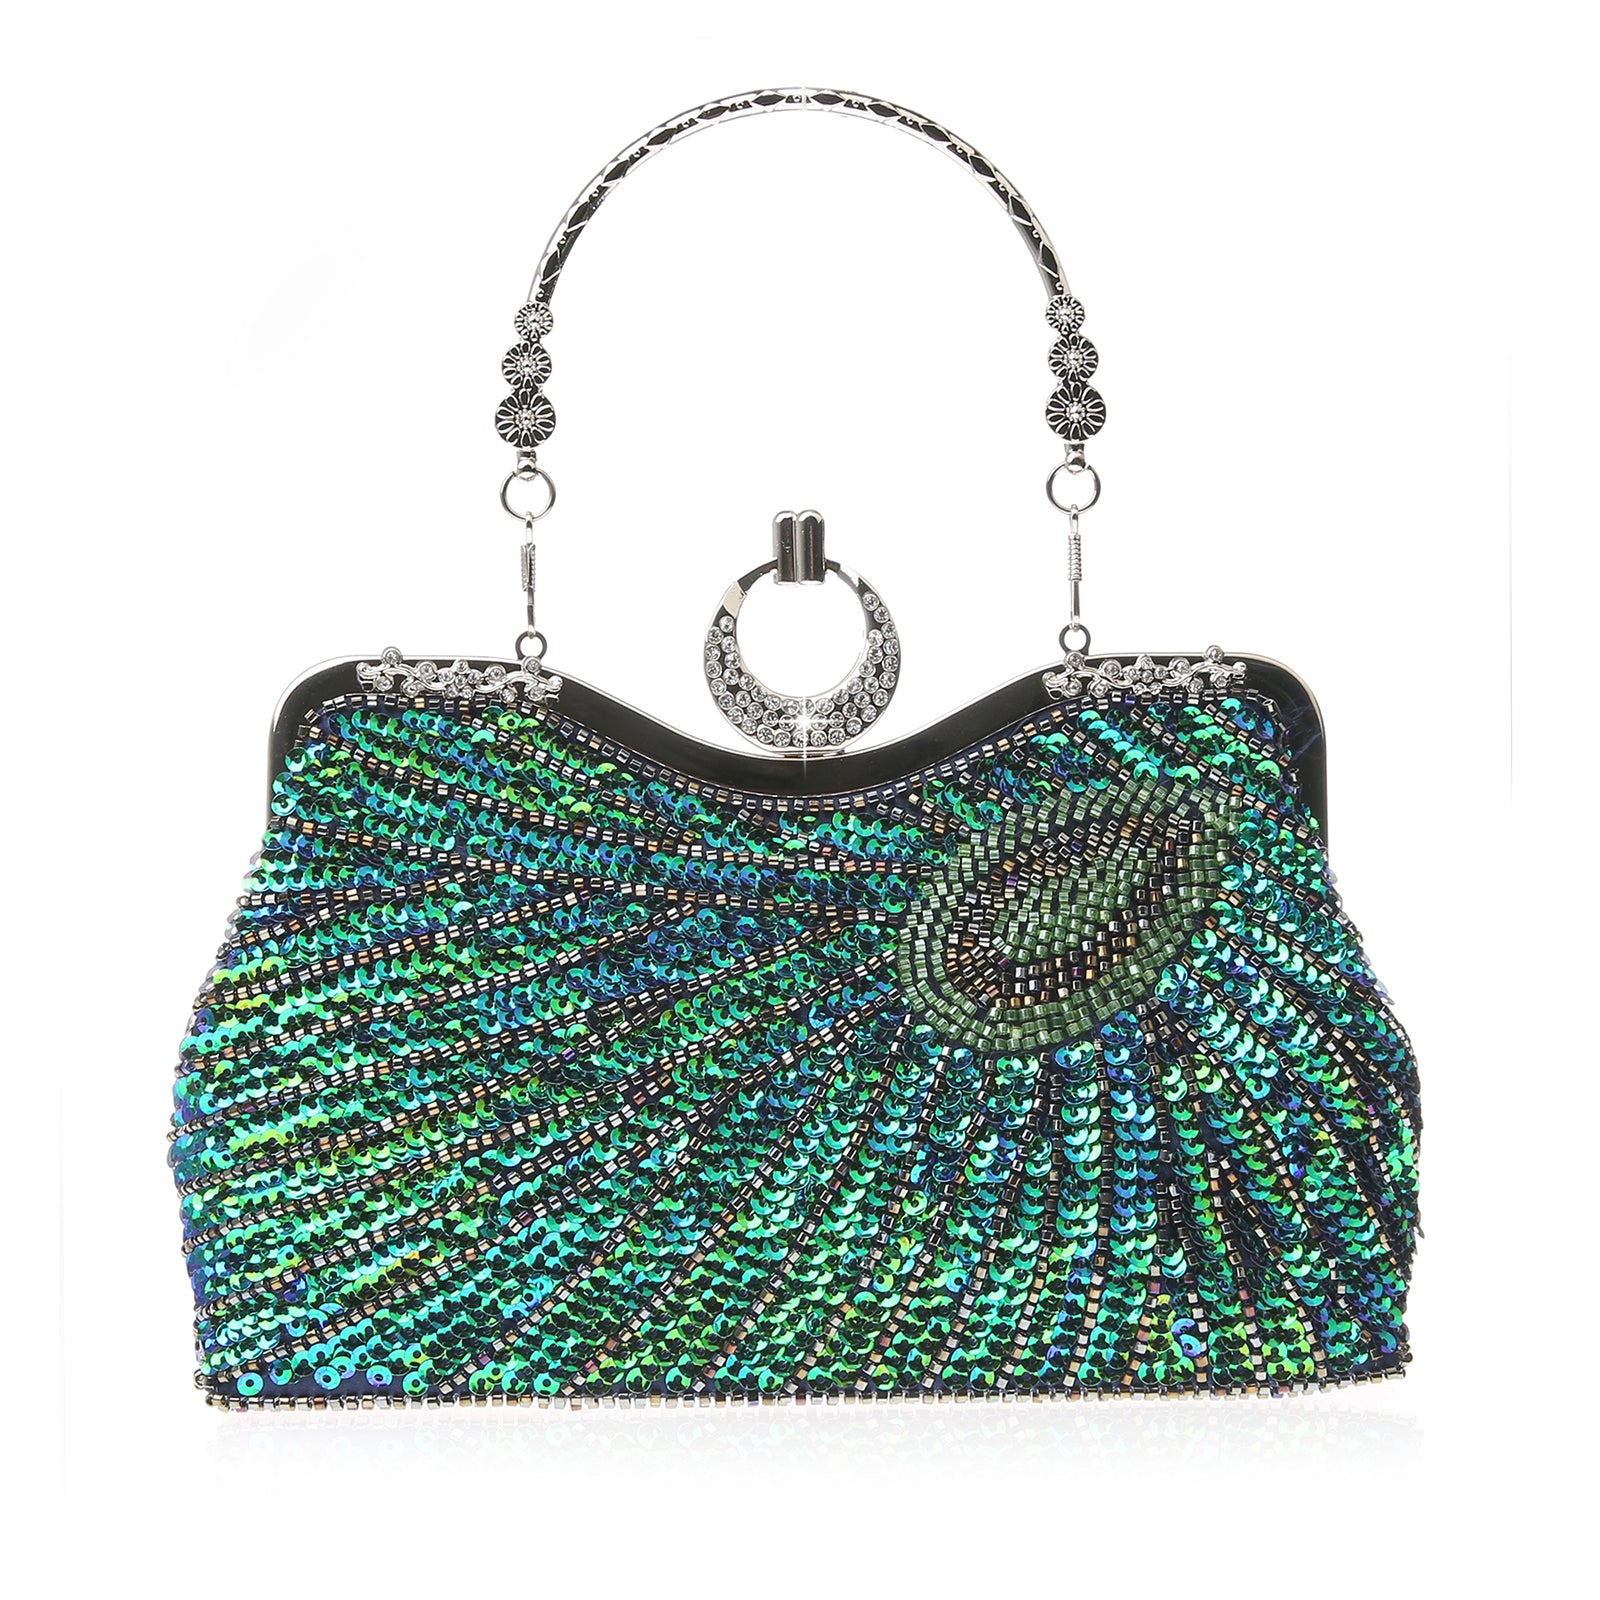 Luxury Crystal Clutches For Women Peacock Clutch Evening Bag CL-107D |  LaceDesign